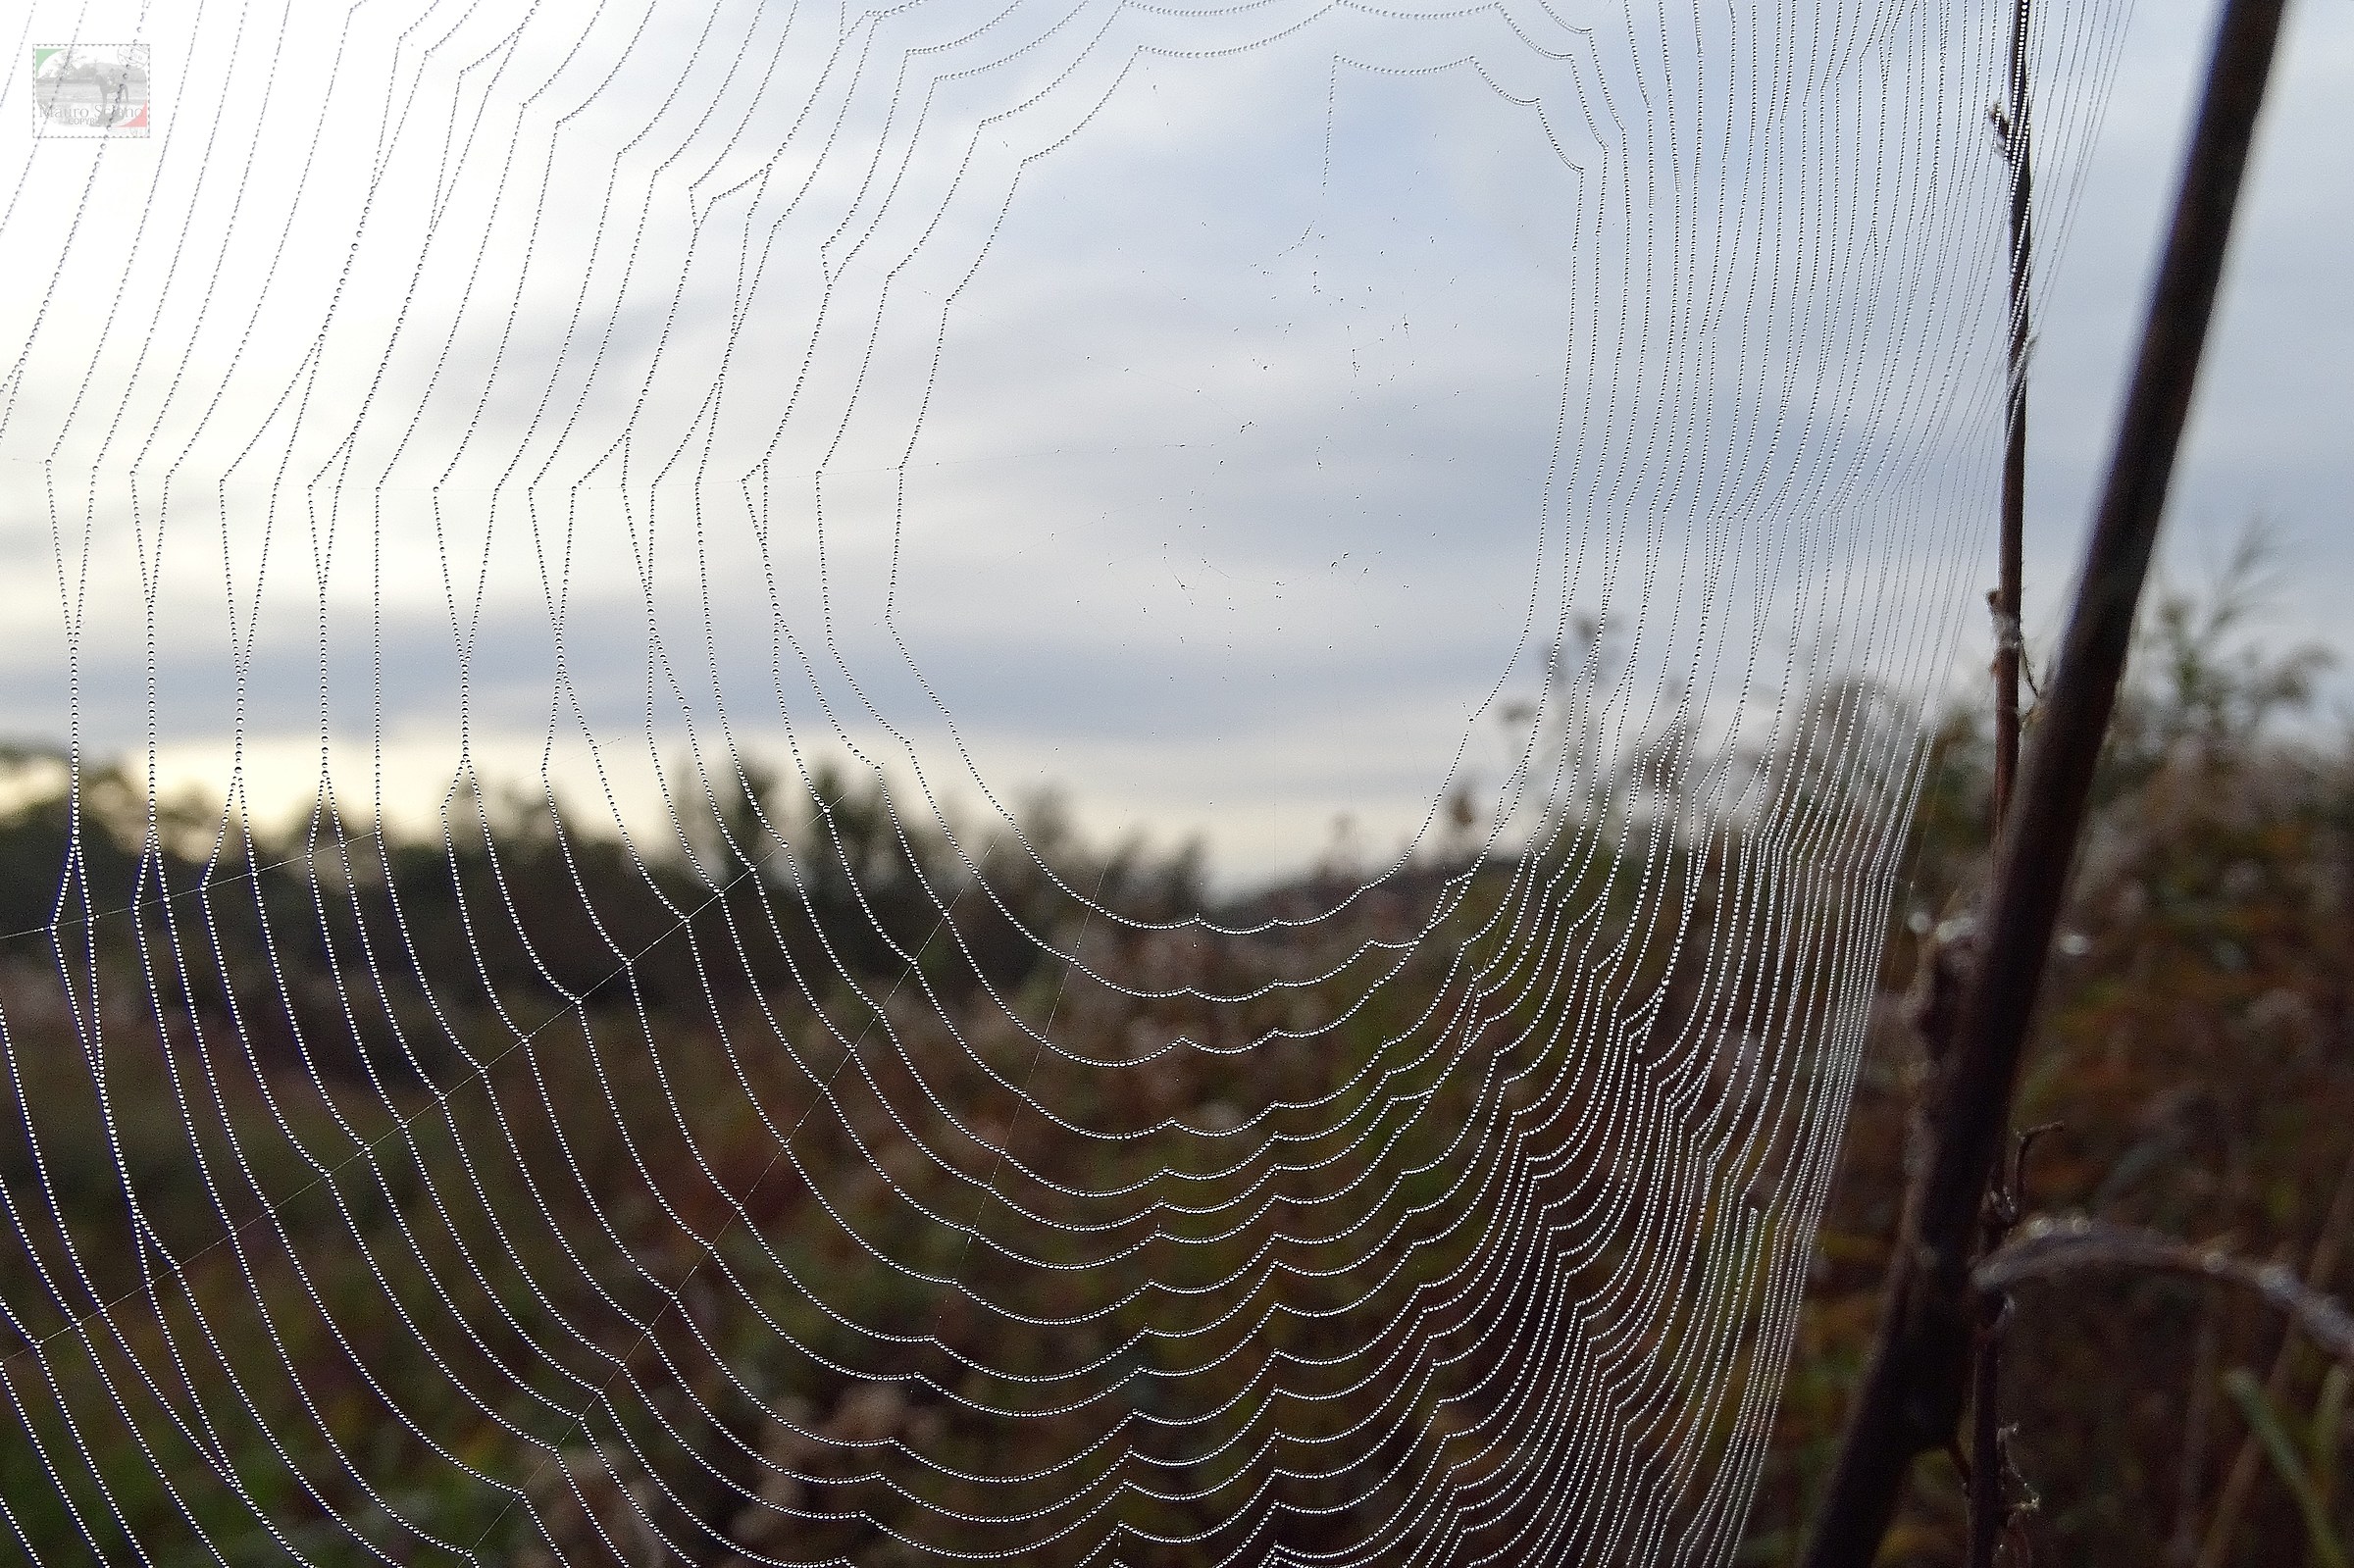 the spider web...